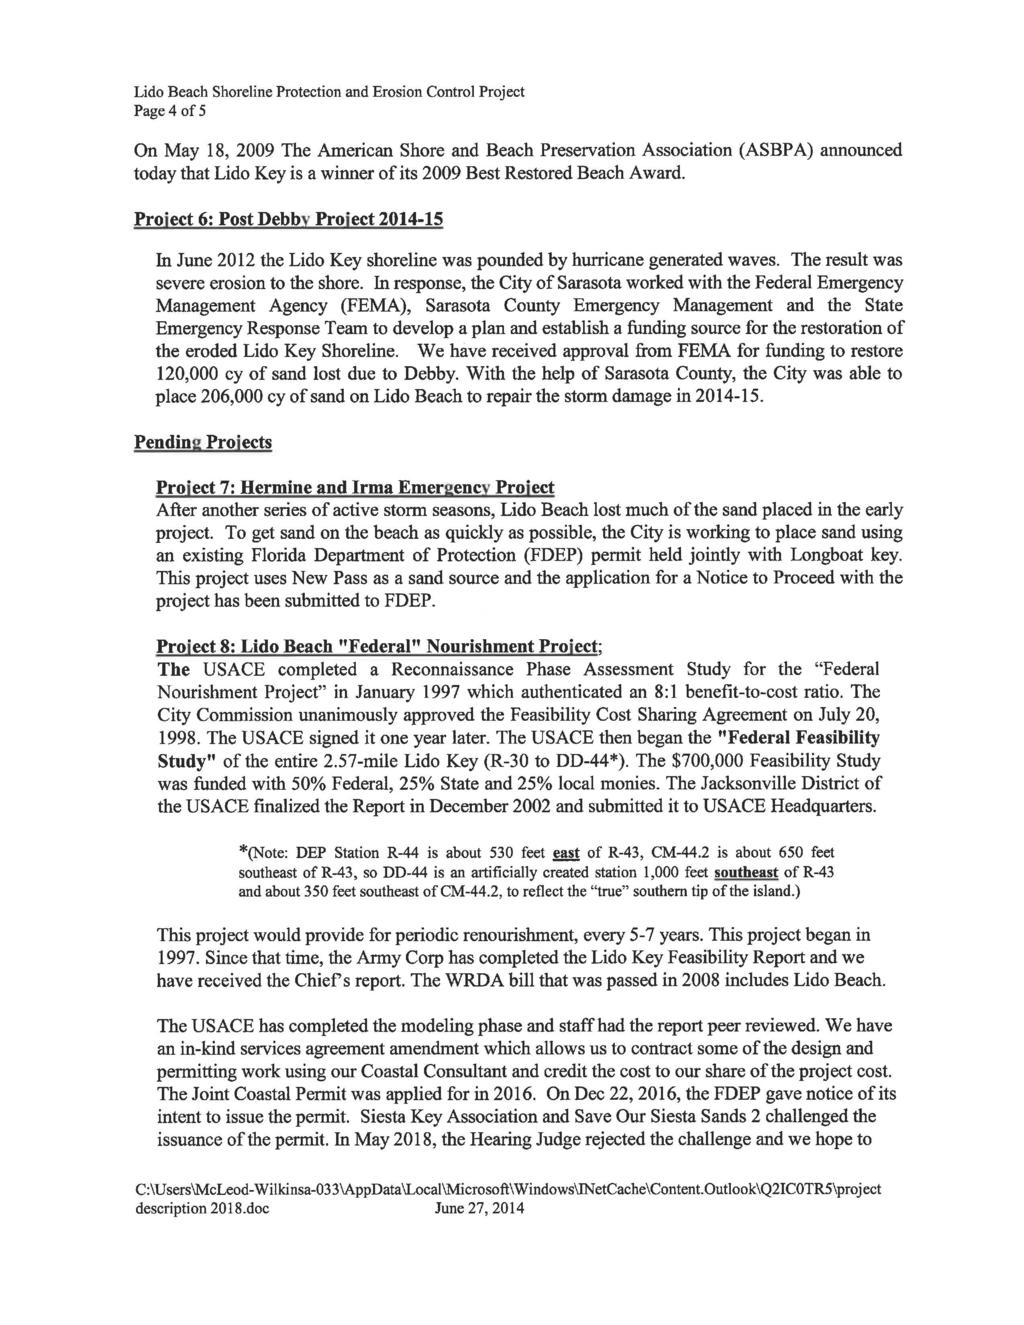 Lido Beach Shoreline Protection and Erosion Control Project Page4 of 5 On May 18, 2009 The American Shore and Beach Preservation Association (ASBPA) announced today that Lido Key is a winner of its